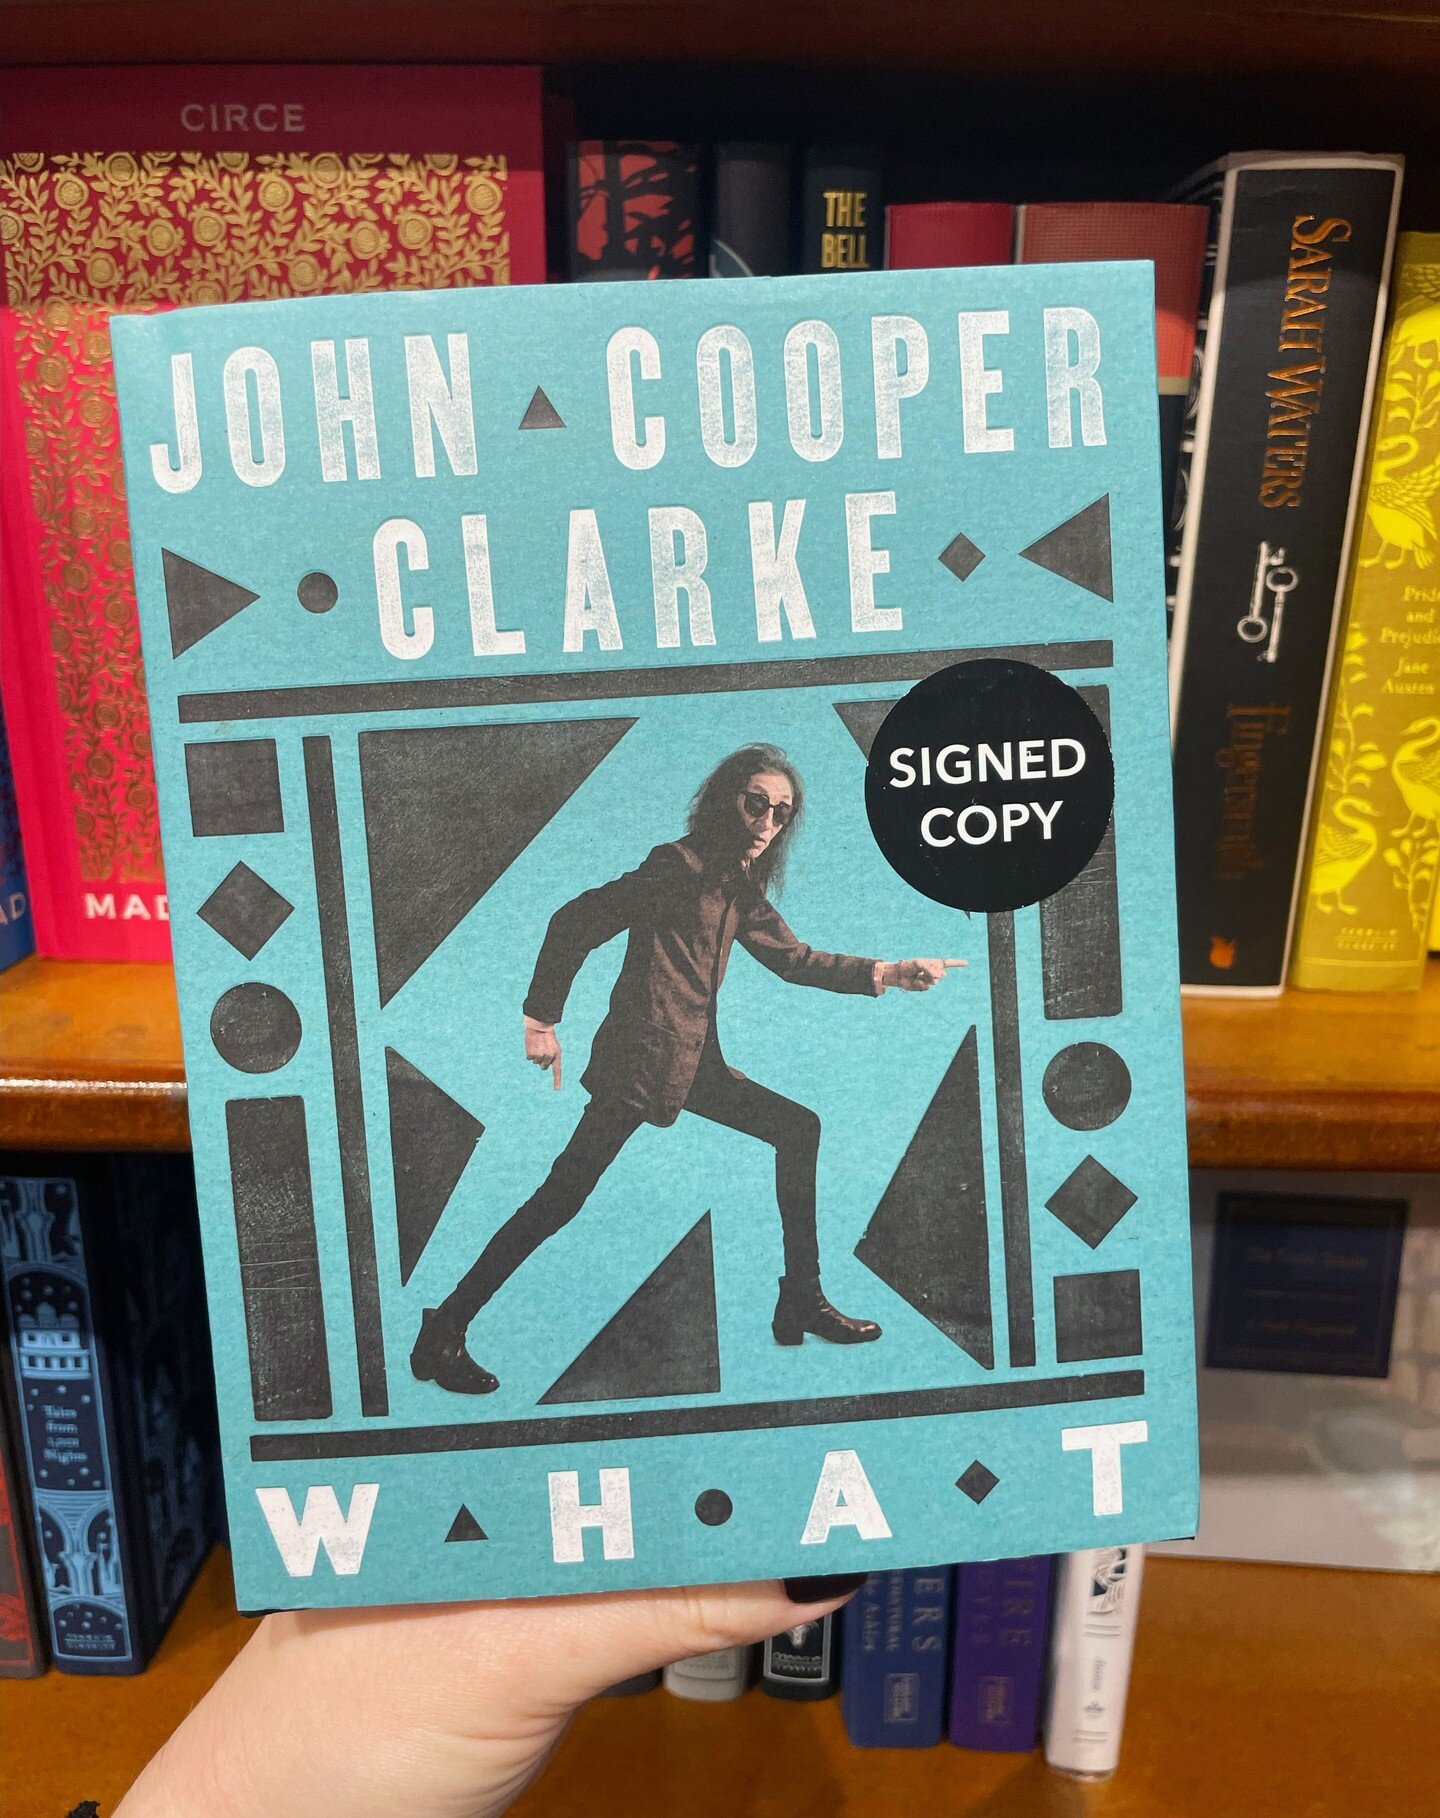 New @johncooperclarke just dropped! Lots of signed copies in store and online at welbooks.co.uk 
.
.
.
.
.
#johncooperclarke #drjohncooperclarke #poetry #manchester #bookshop #bookstagram #indiebookshop
#westhampsteadlife#independentbookshop #westham